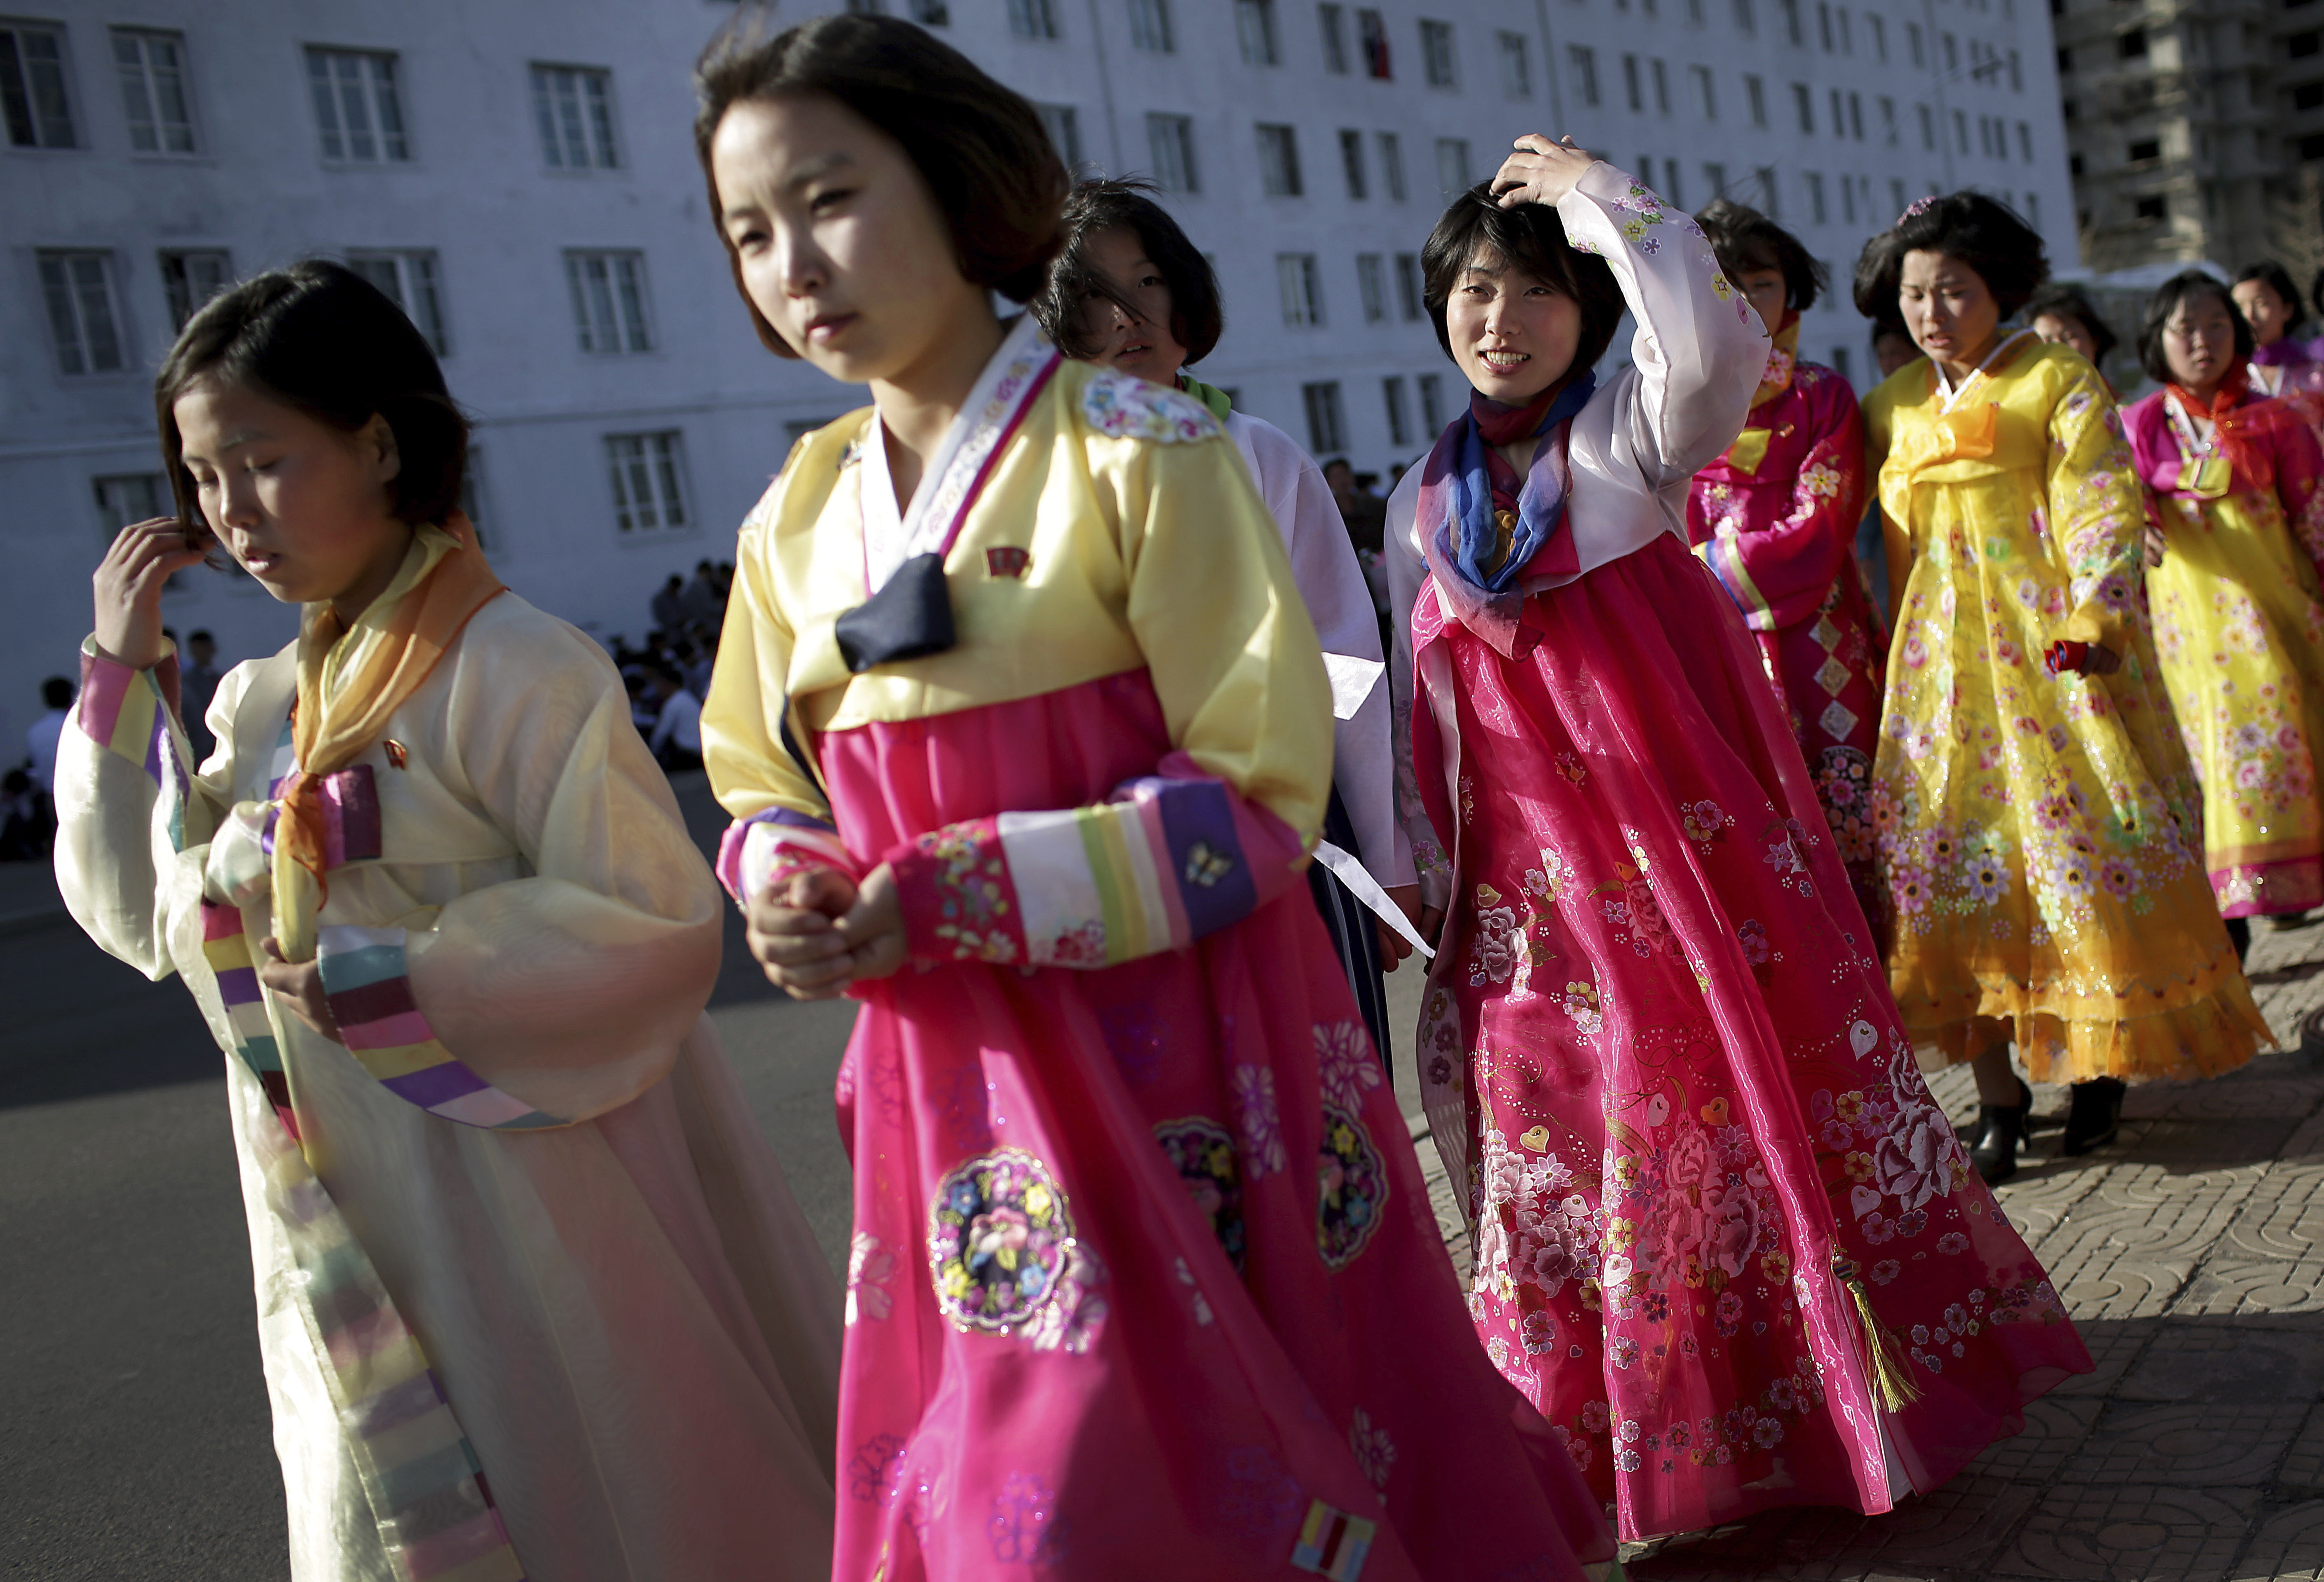 North Korean girls wearing traditional dresses walk along the street in front of Kim Il Sung Square Wednesday, April 12, 2017, in Pyongyang, North Korea. North Korea will mark the 105th anniversary of the birth of the late leader Kim Il Sung on April 15. (AP Photo/Wong Maye-E)